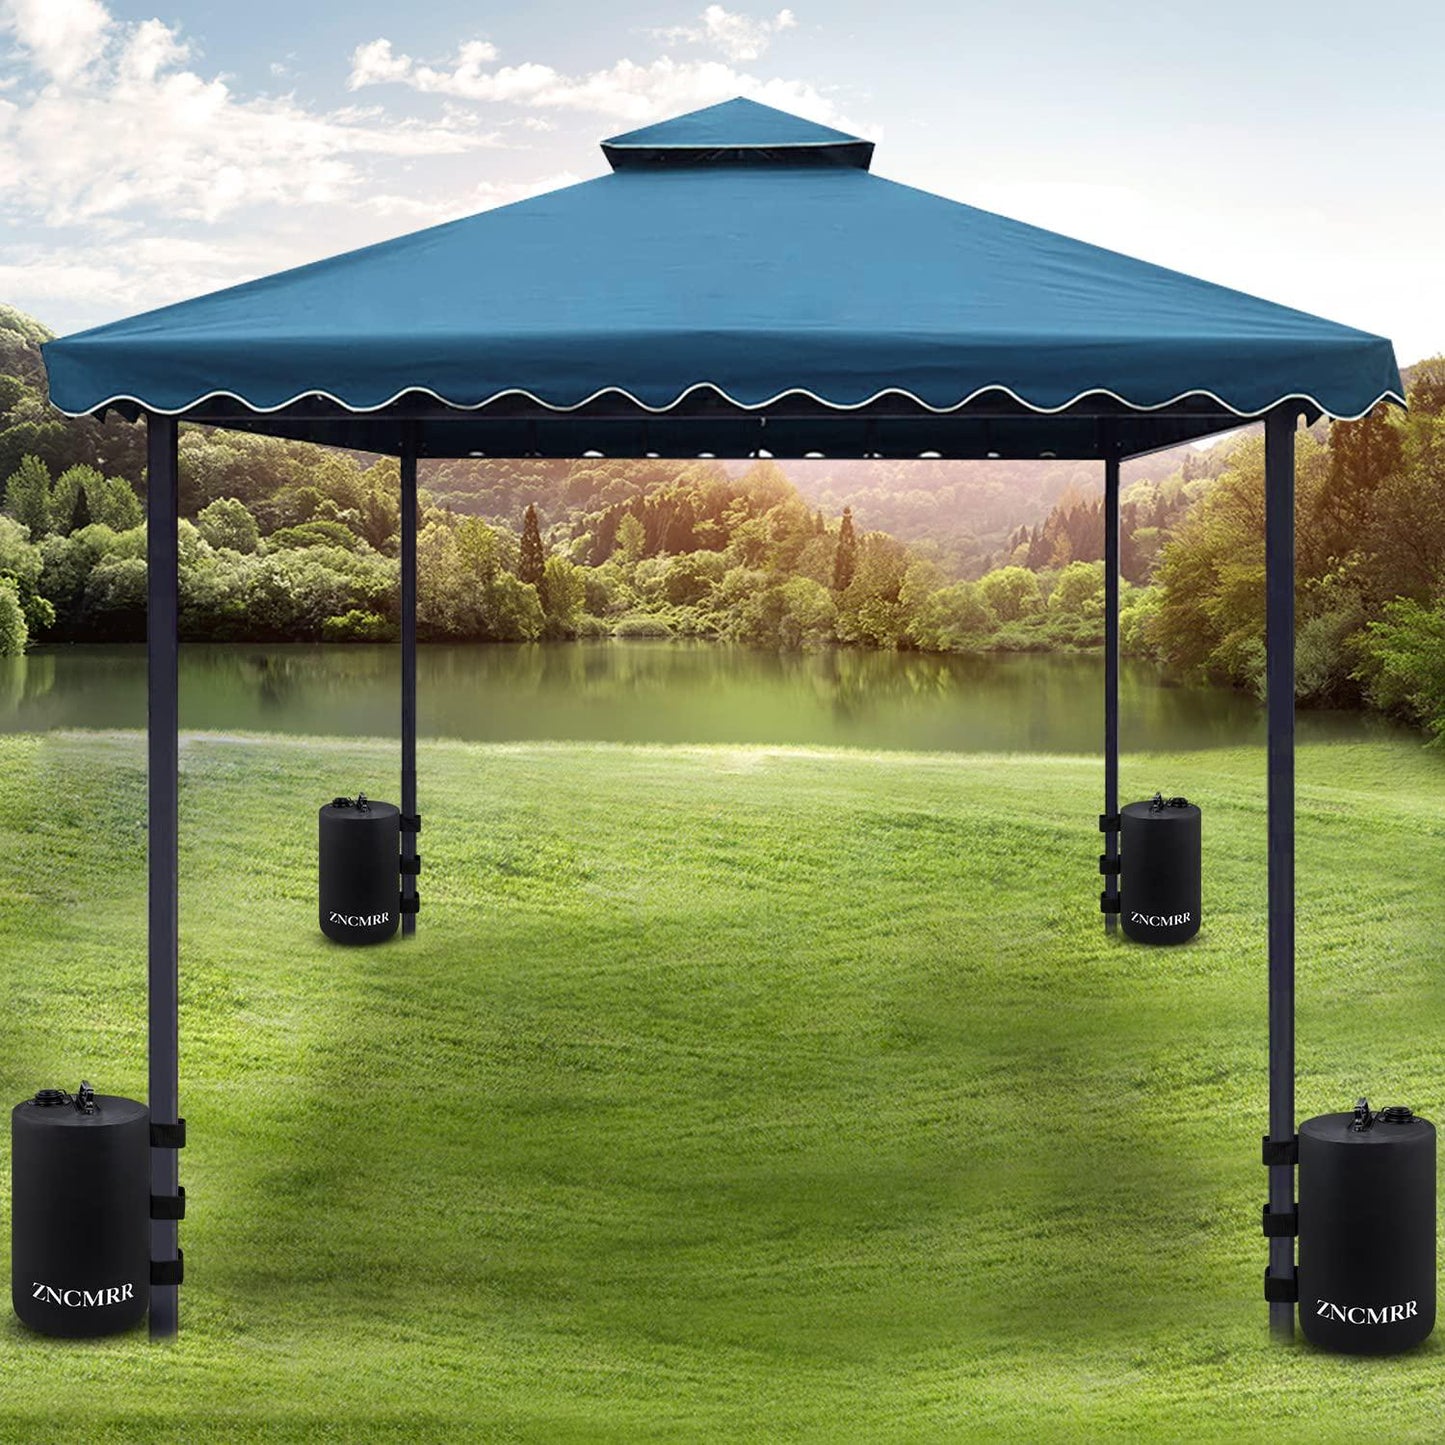 Canopy Water Weight Bag Leg Weights for Pop Up Canopy, Tent, Gazebo, Set of 4, Black